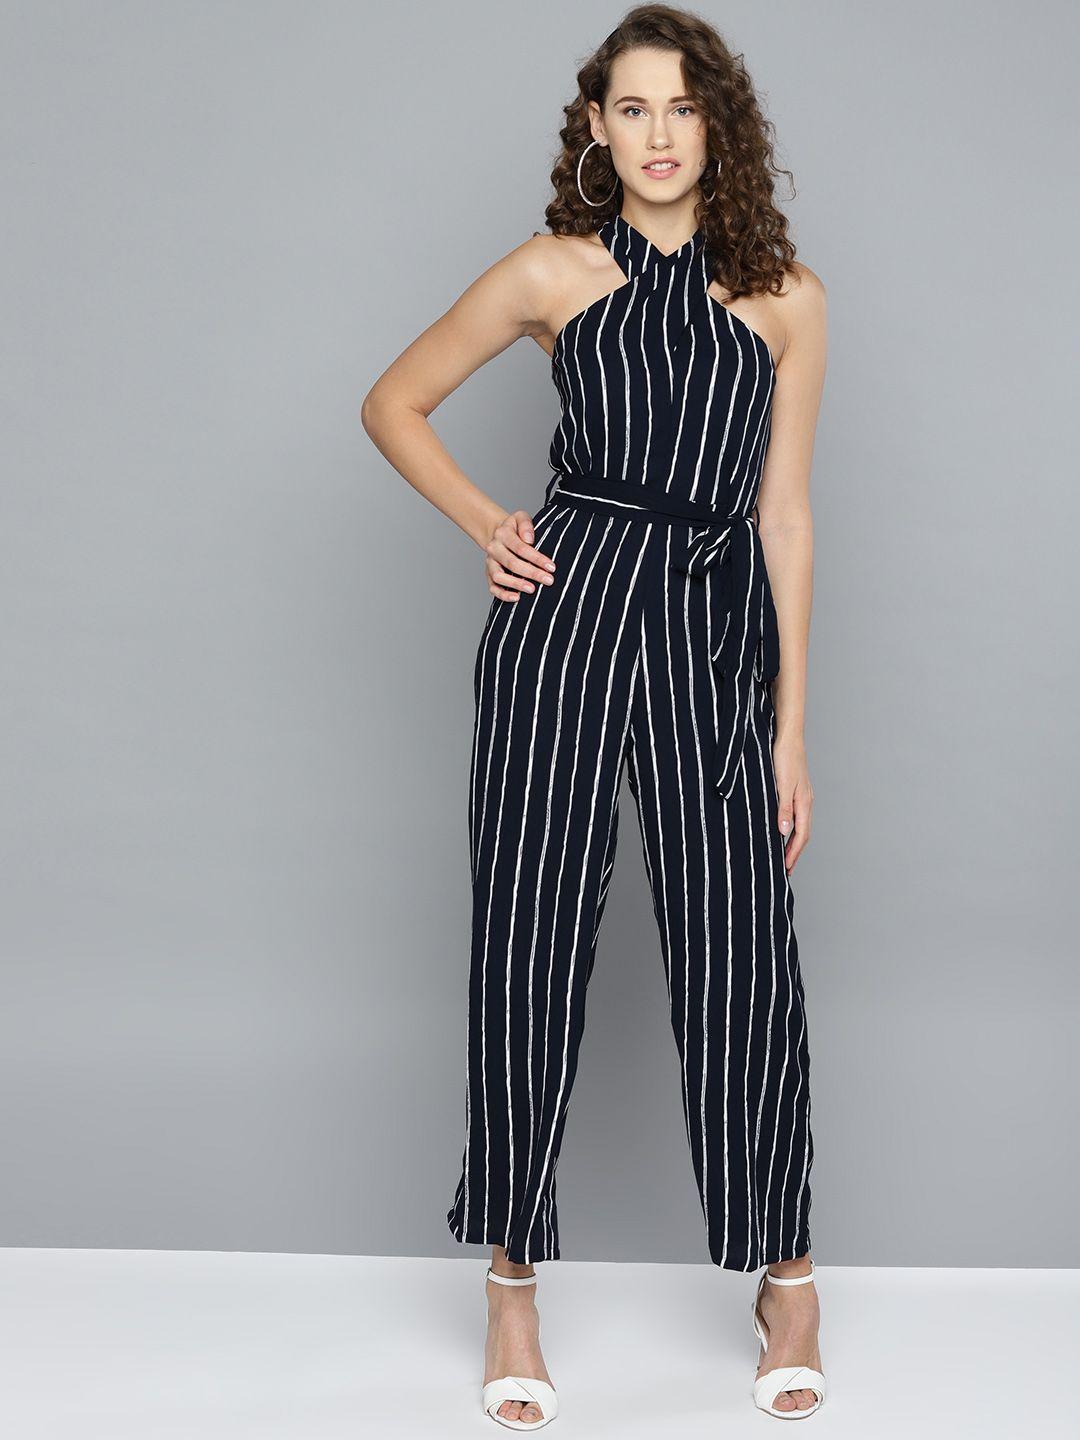 marie claire women navy blue & white striped basic jumpsuit